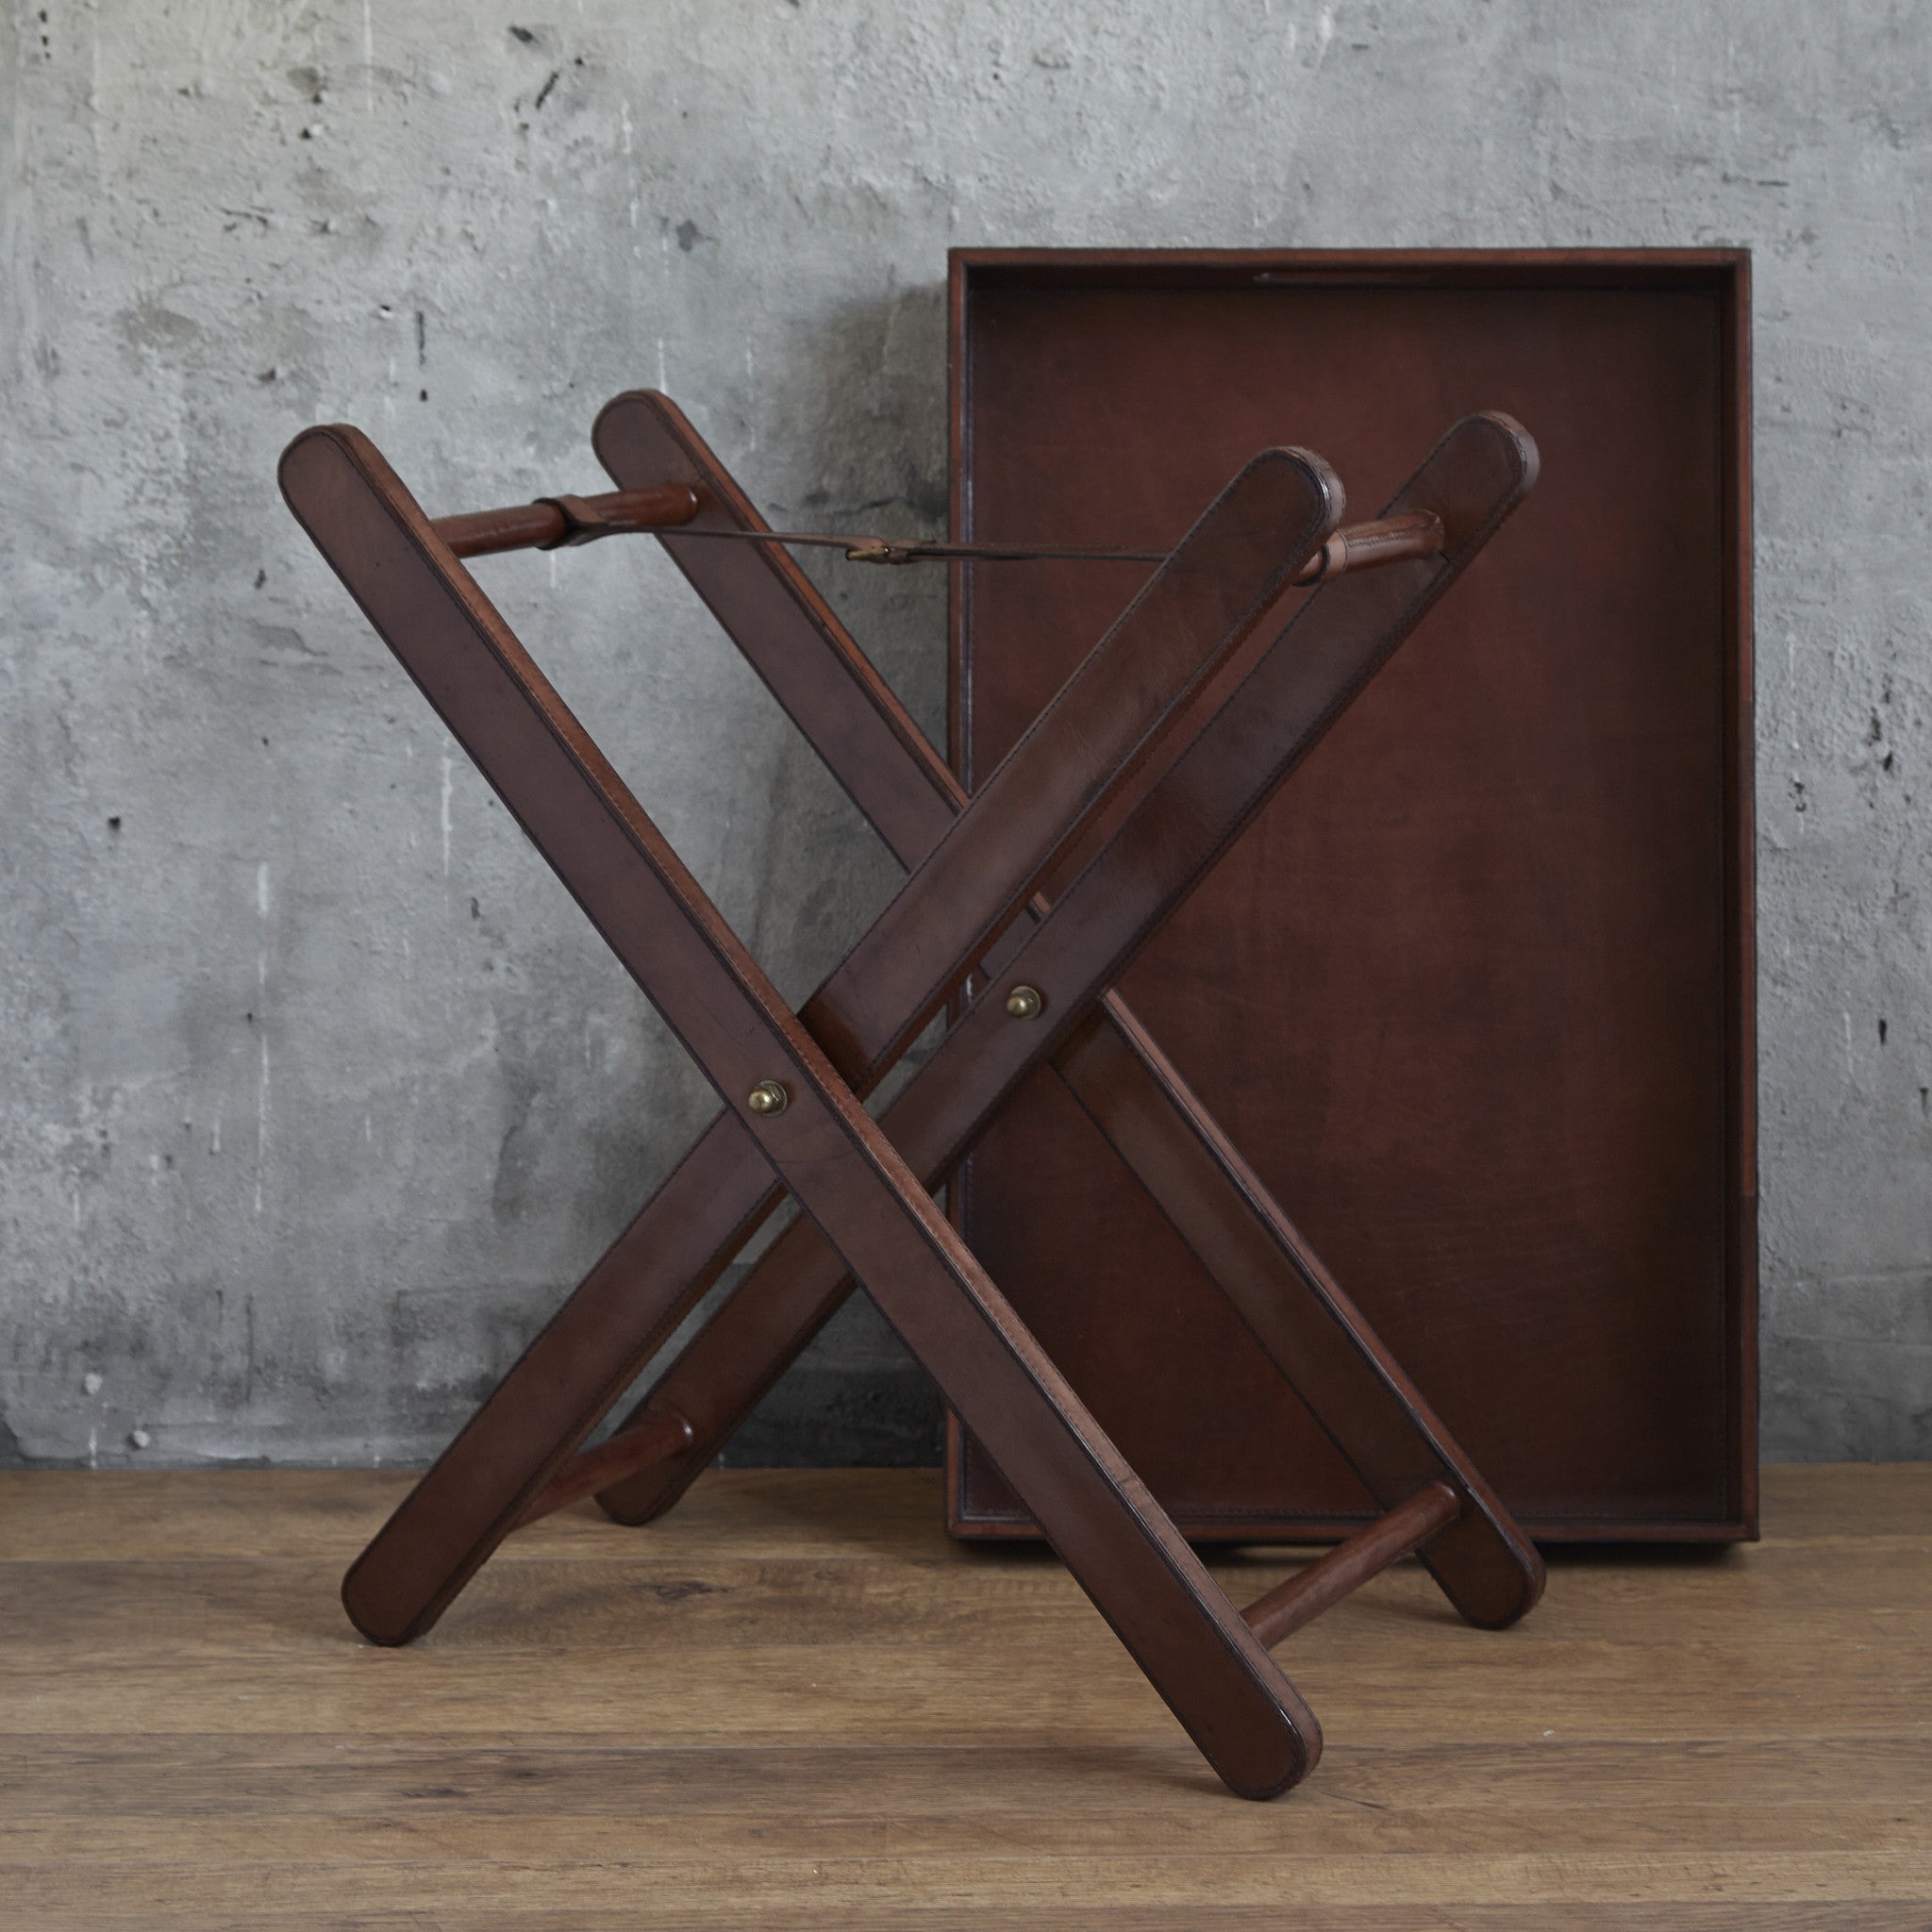 Leather removable butler tray shown off the legs as two separate items.